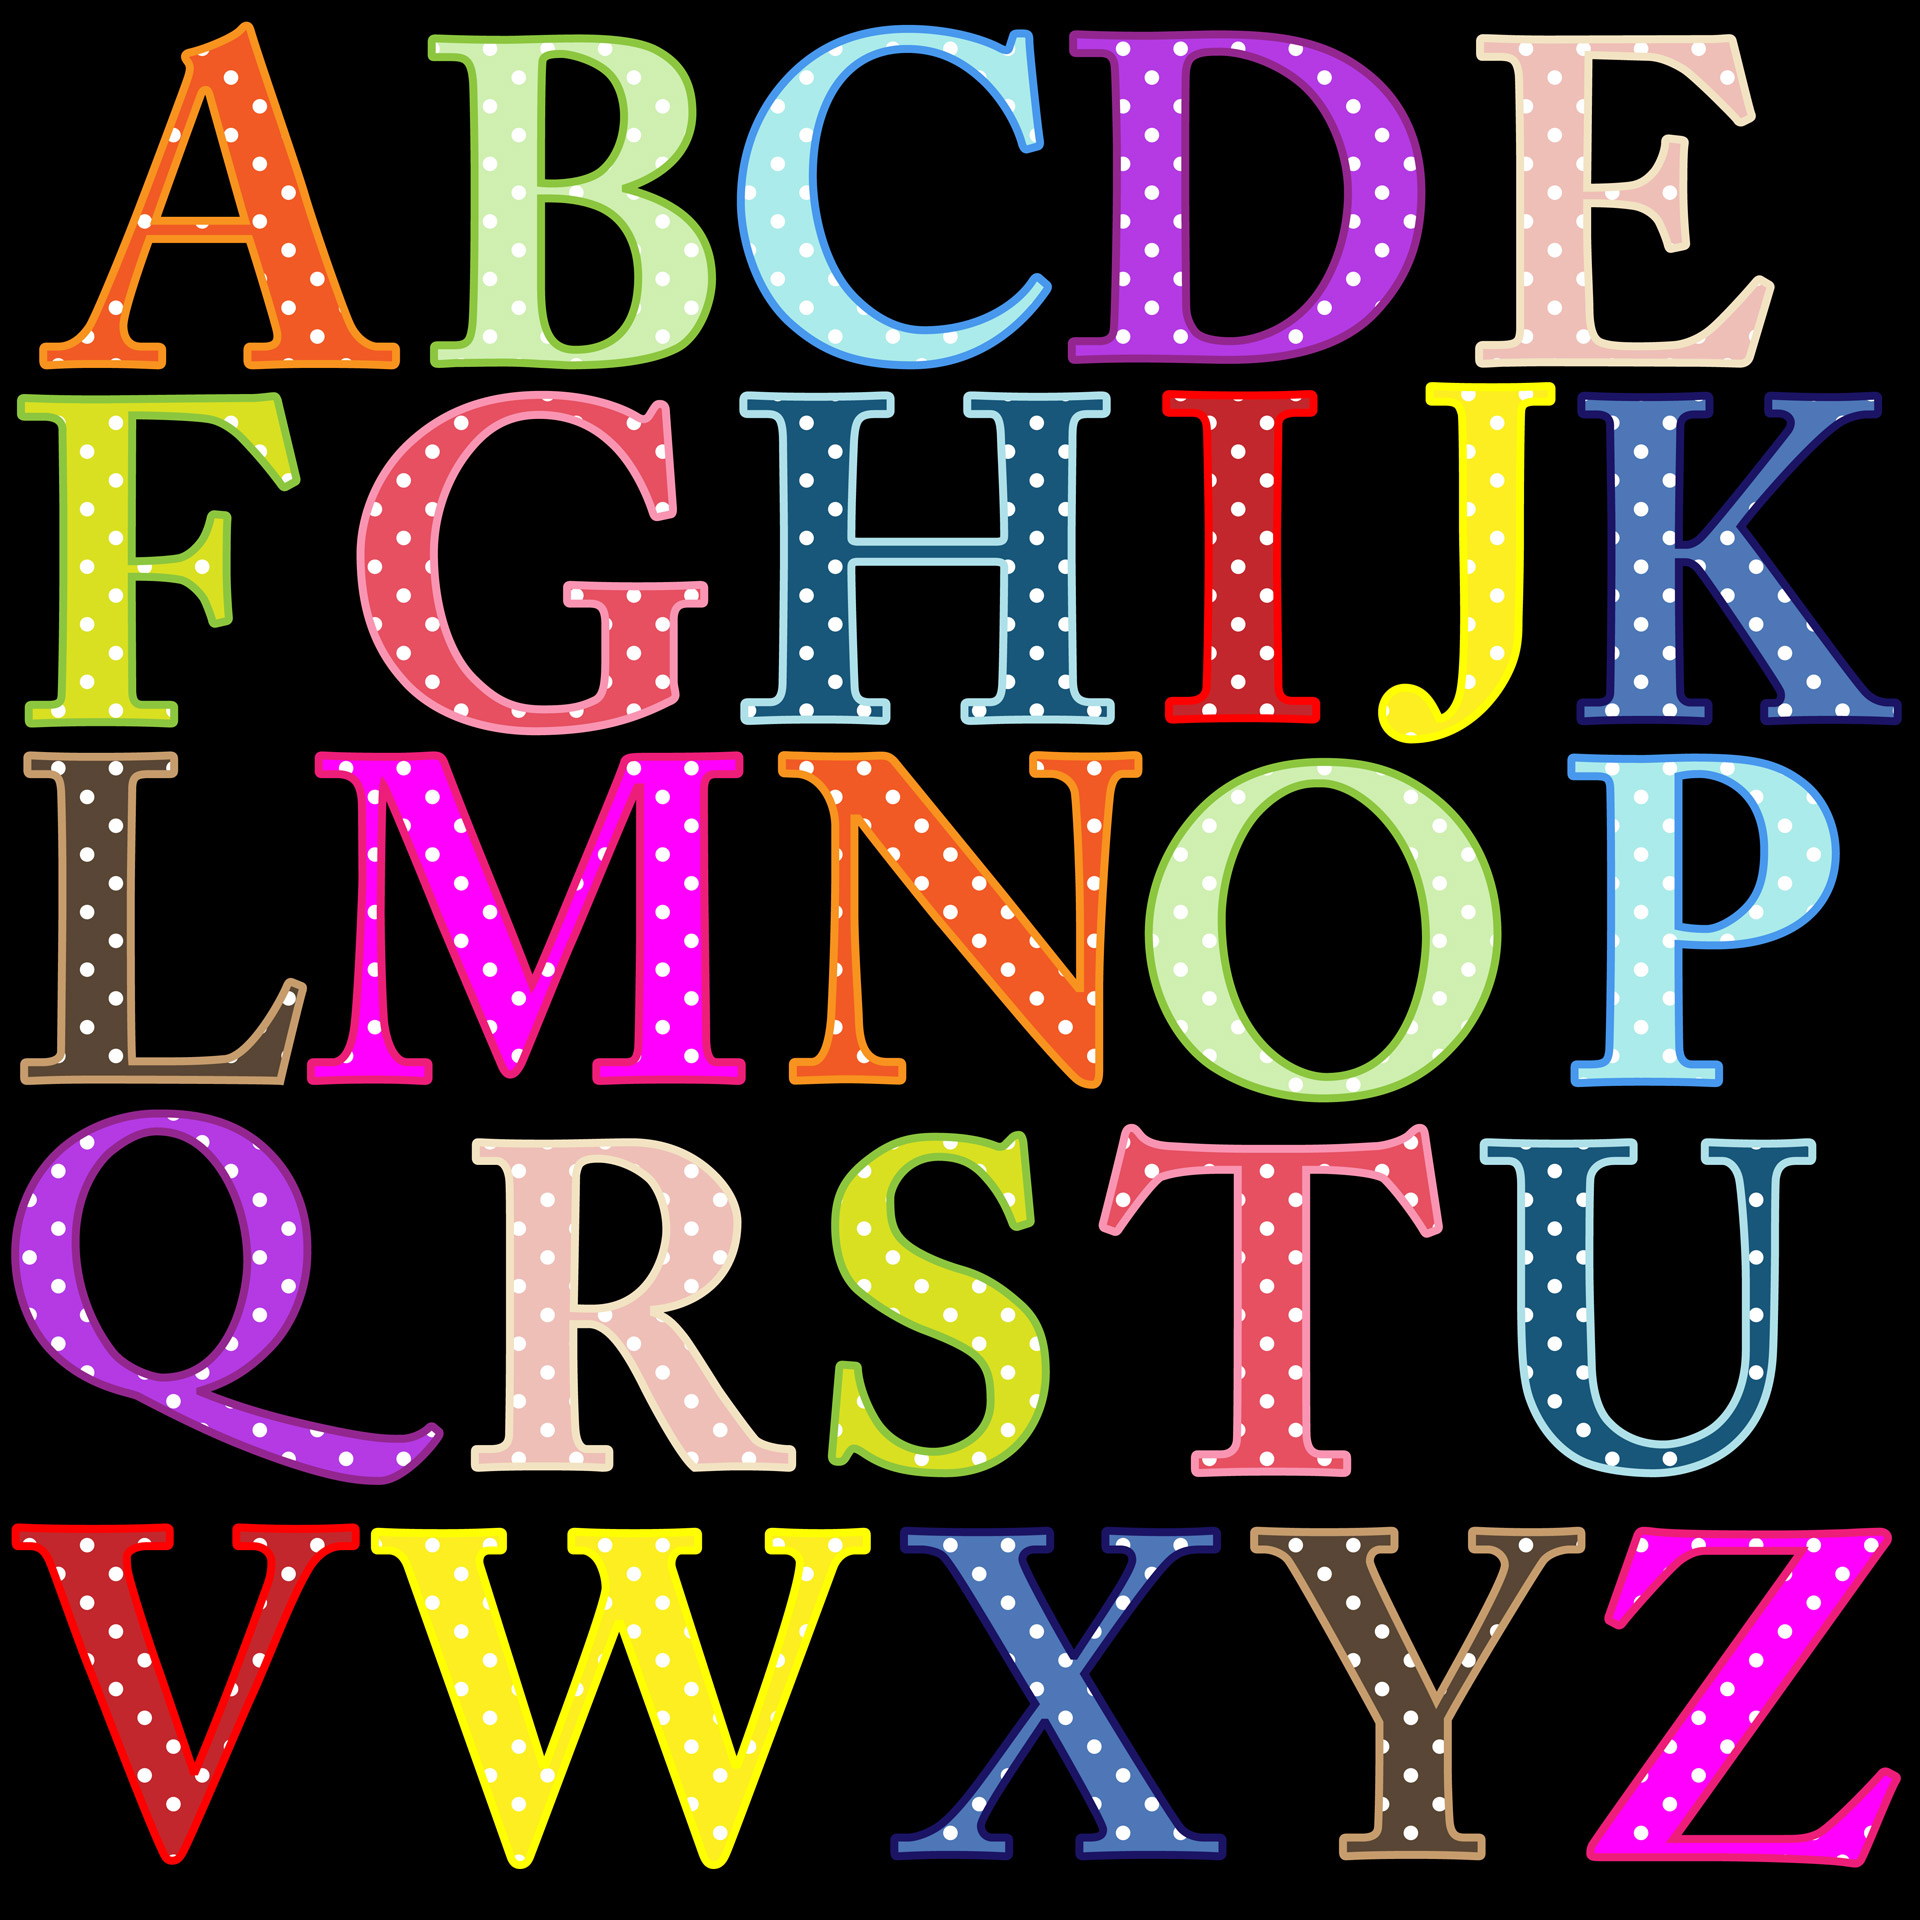 alphabet-letters-alphabet-letters-a-z-colorful-free-image-from-needpix